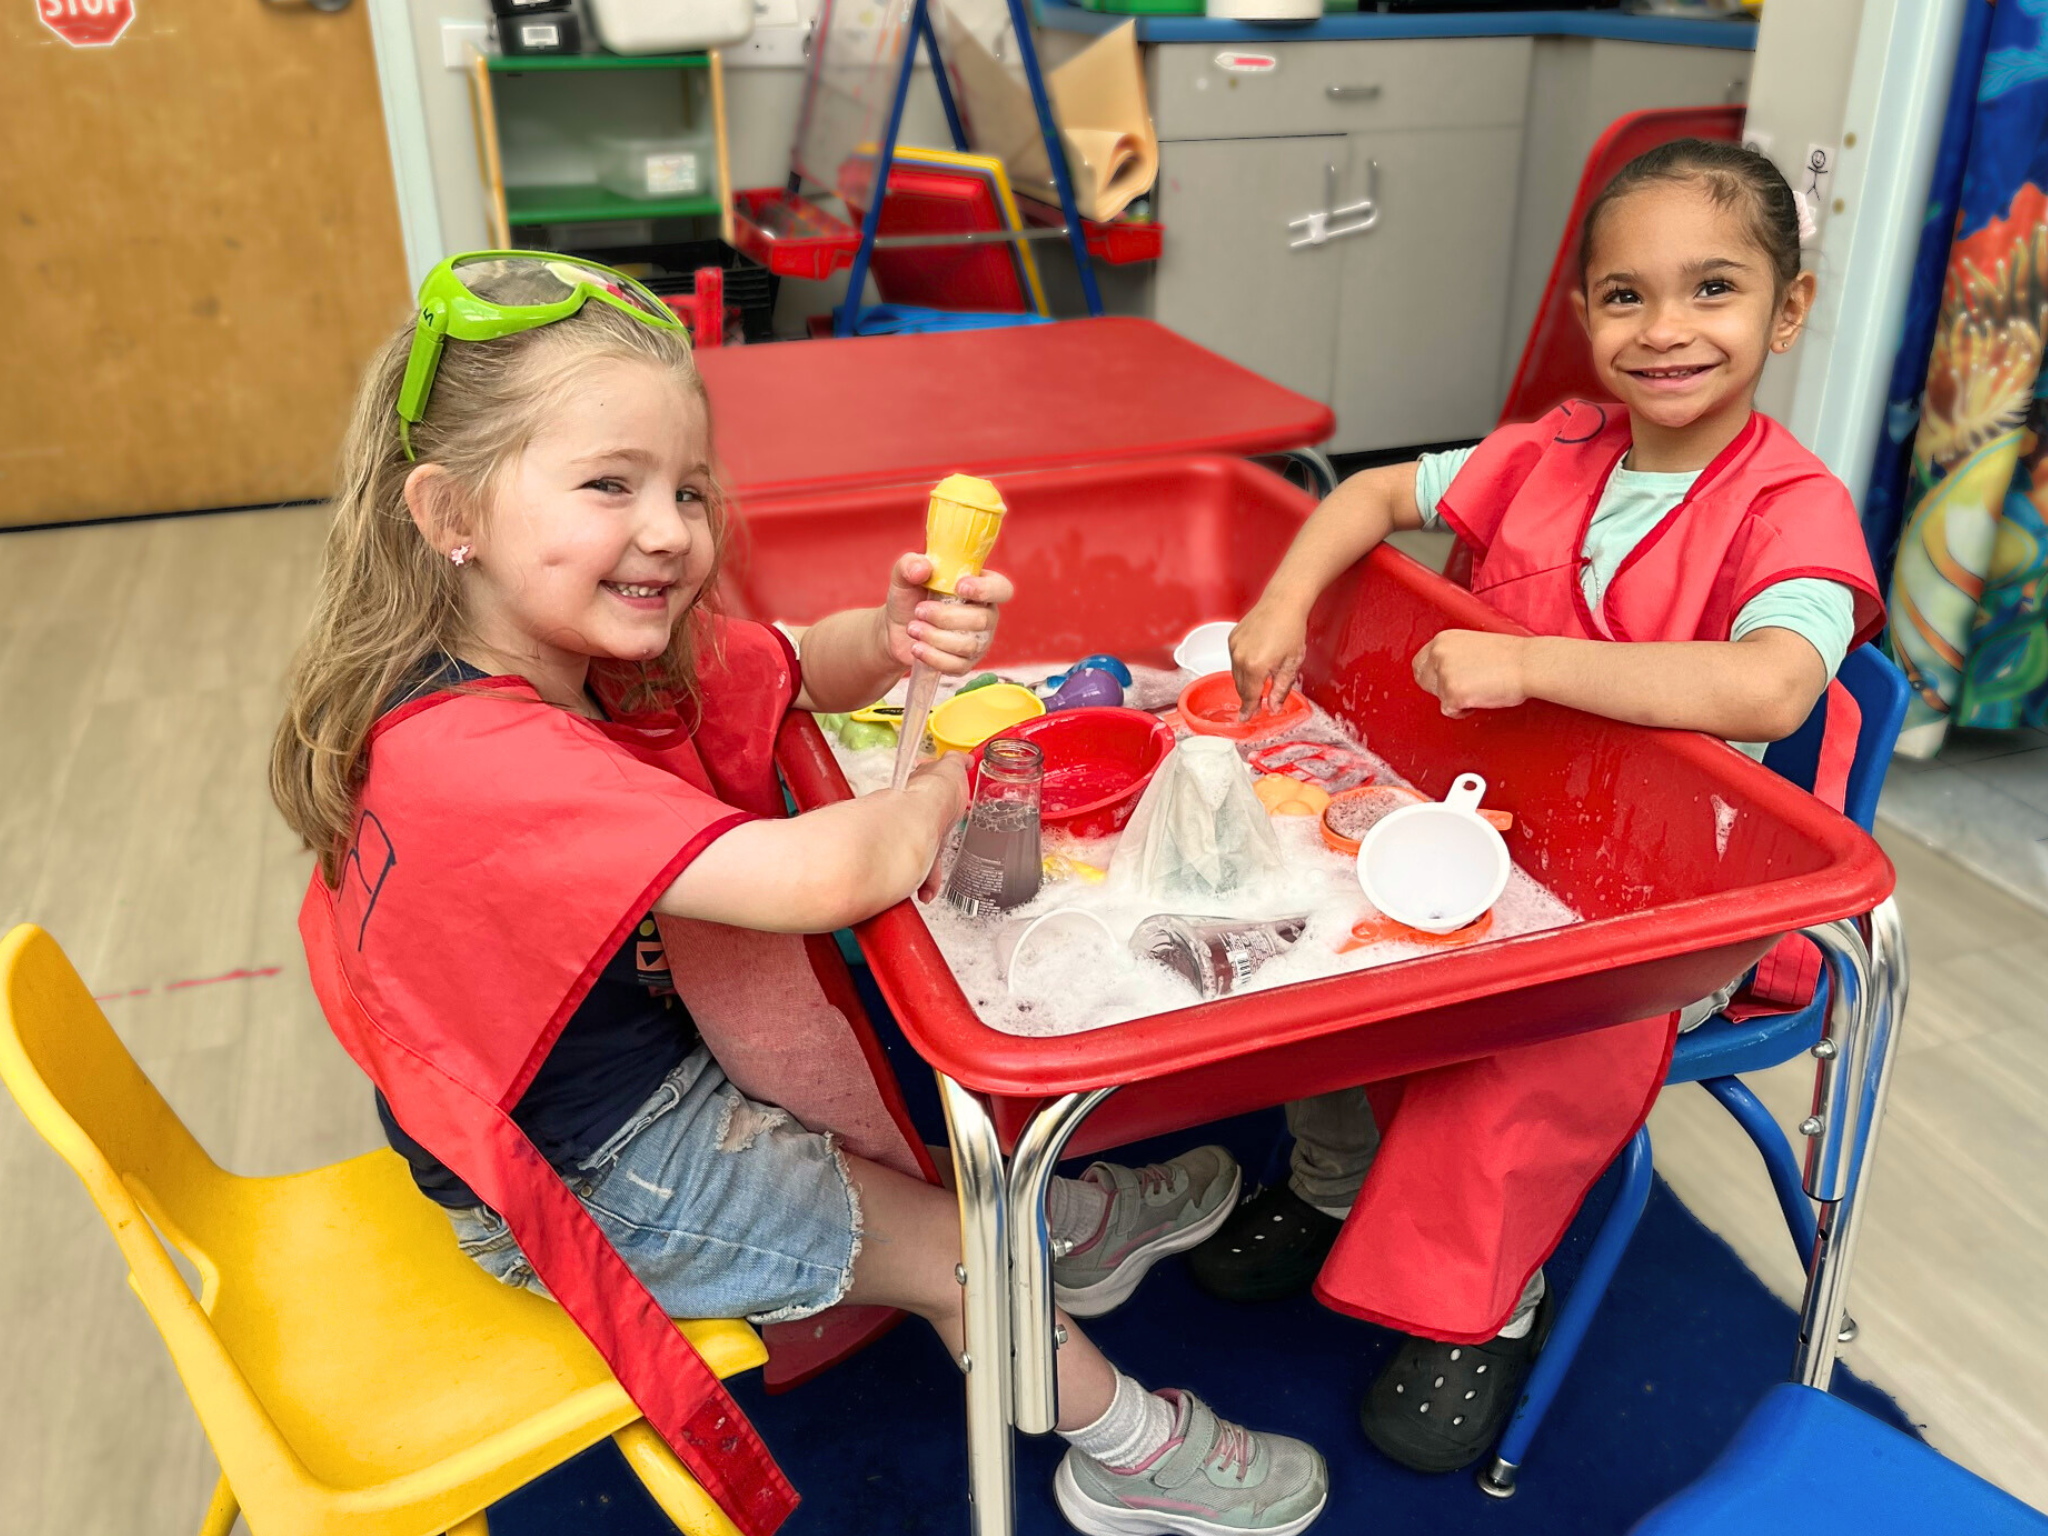 Two preschool girls in red aprons sit in chairs across from each other playing in a red water table smiling during full-day child care program